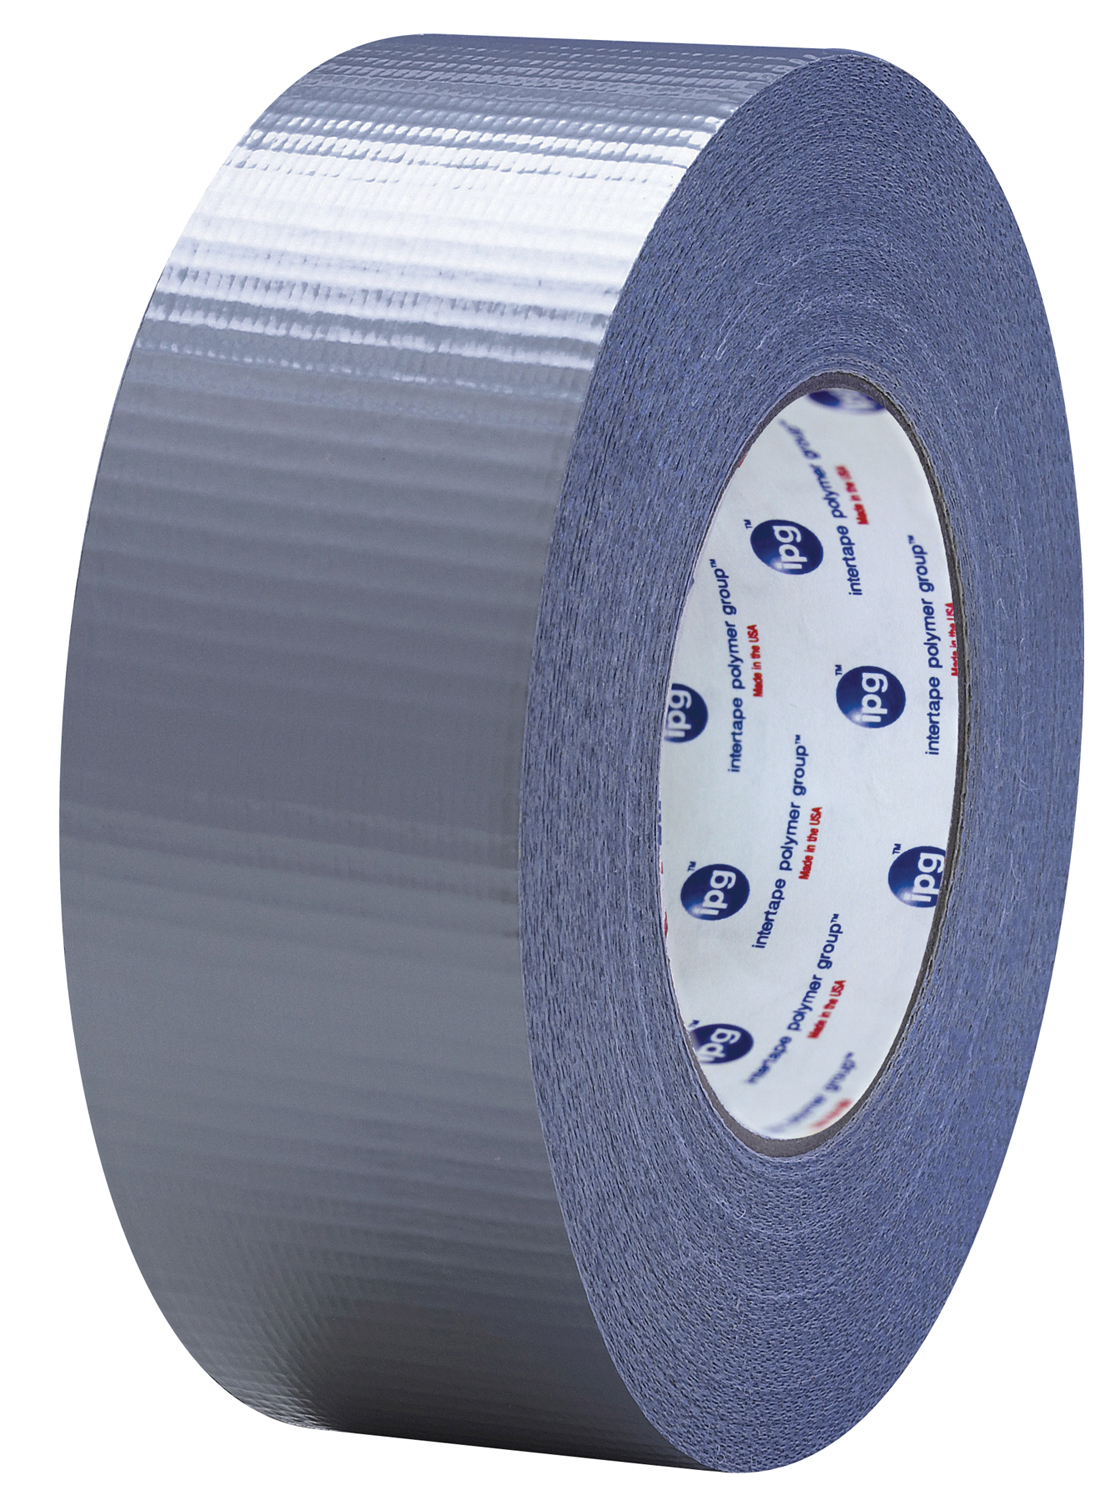 IPG 4137 Duct Tape, 60 yd L, 1.88 in W, Cloth Backing, Silver - image 2 of 2